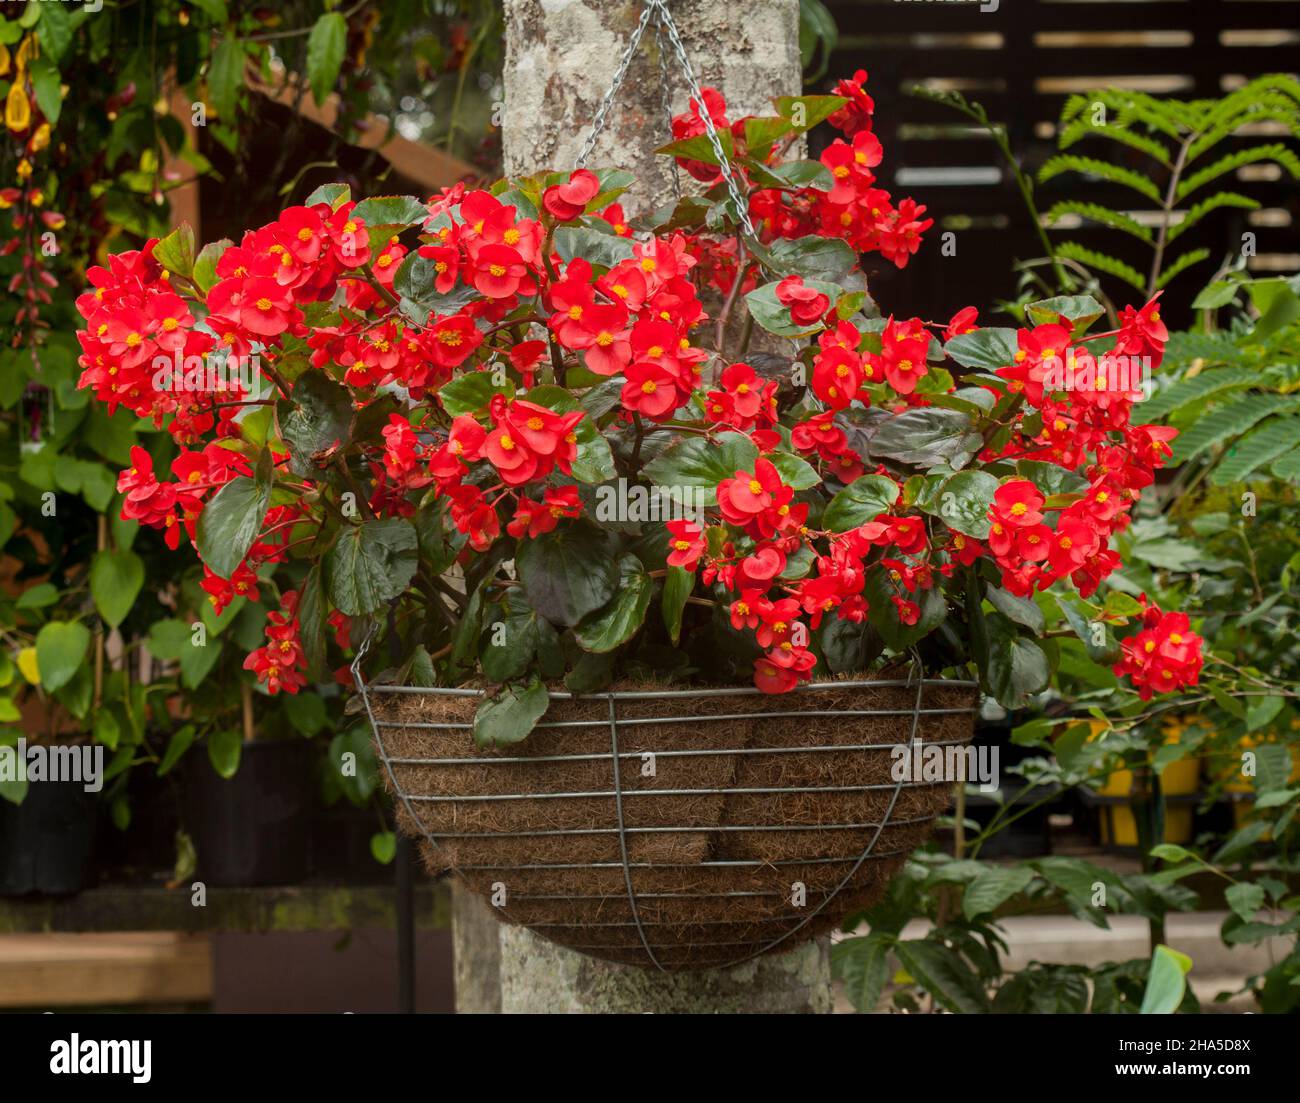 Begonia, covered with vivid red flowers, growing in a hanging basket Stock Photo